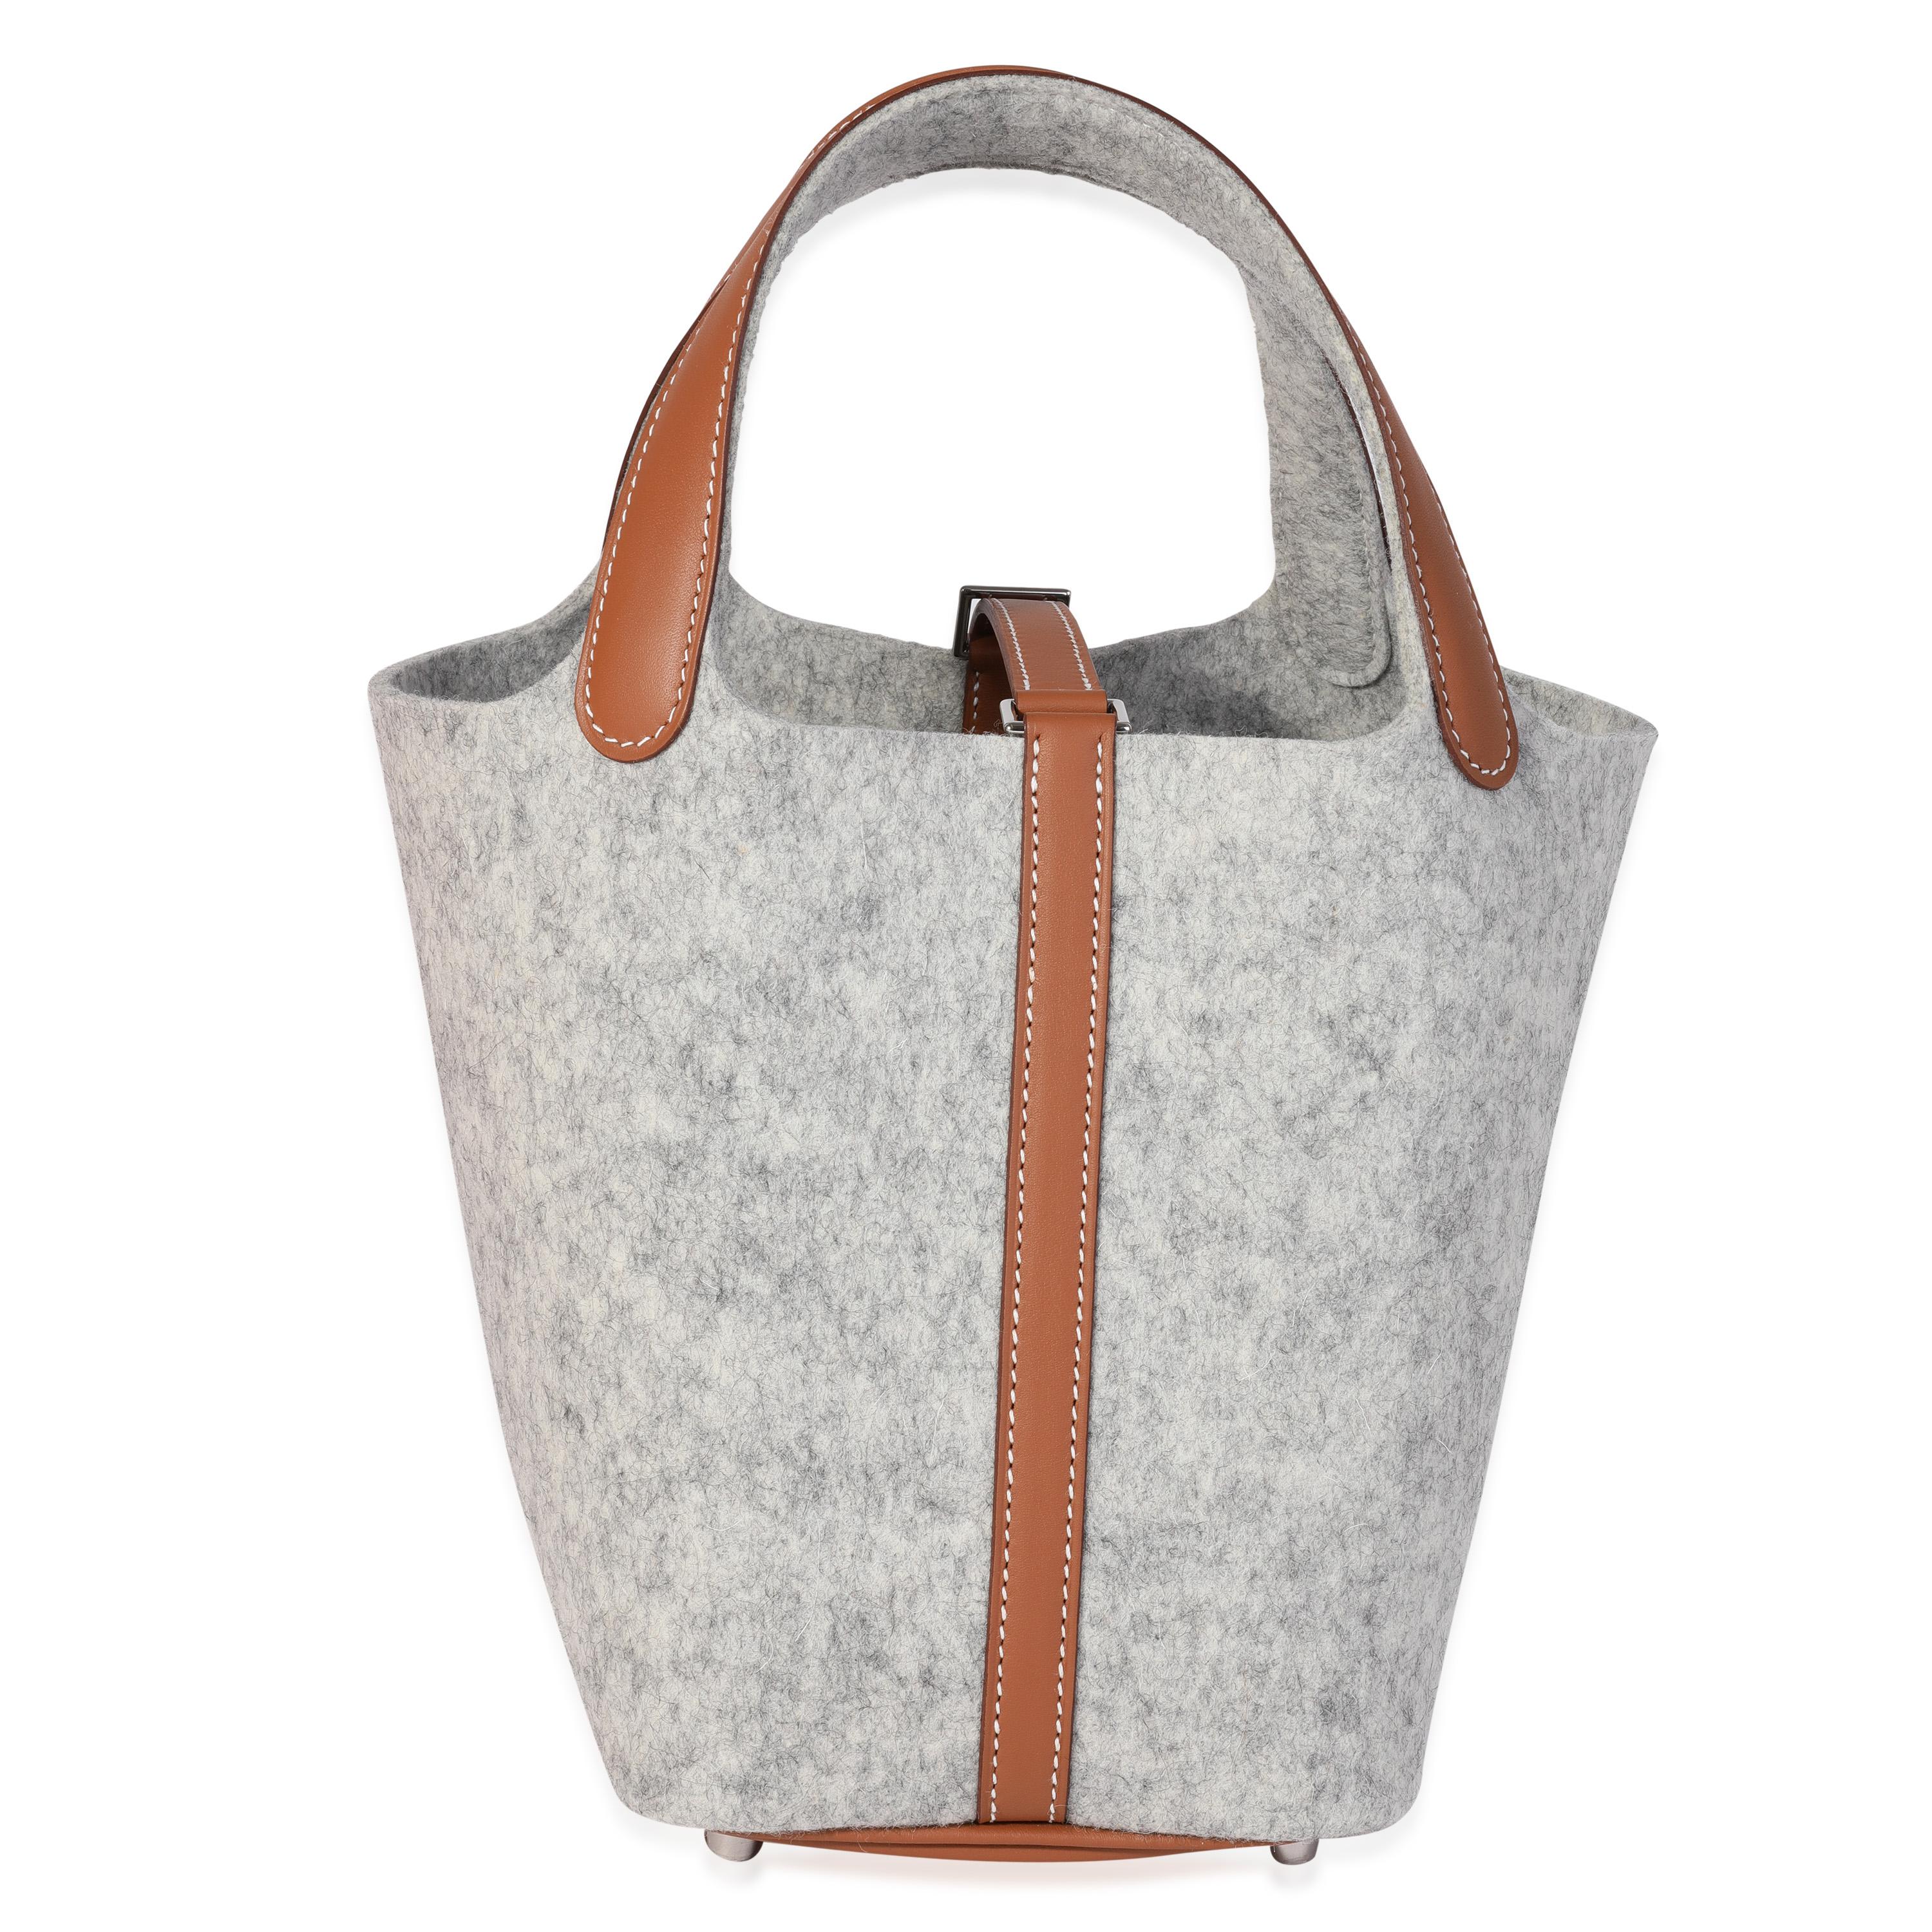 Listing Title: Hermès Gris Clair Feutre & Gold Swift Picotin Lock 18 PHW
SKU: 120407
Condition: Pre-owned 
Handbag Condition: Mint
Condition Comments: Mint Condition. Final sale.
Brand: Hermès
Model: Picotin Lock
Origin Country: France
Handbag